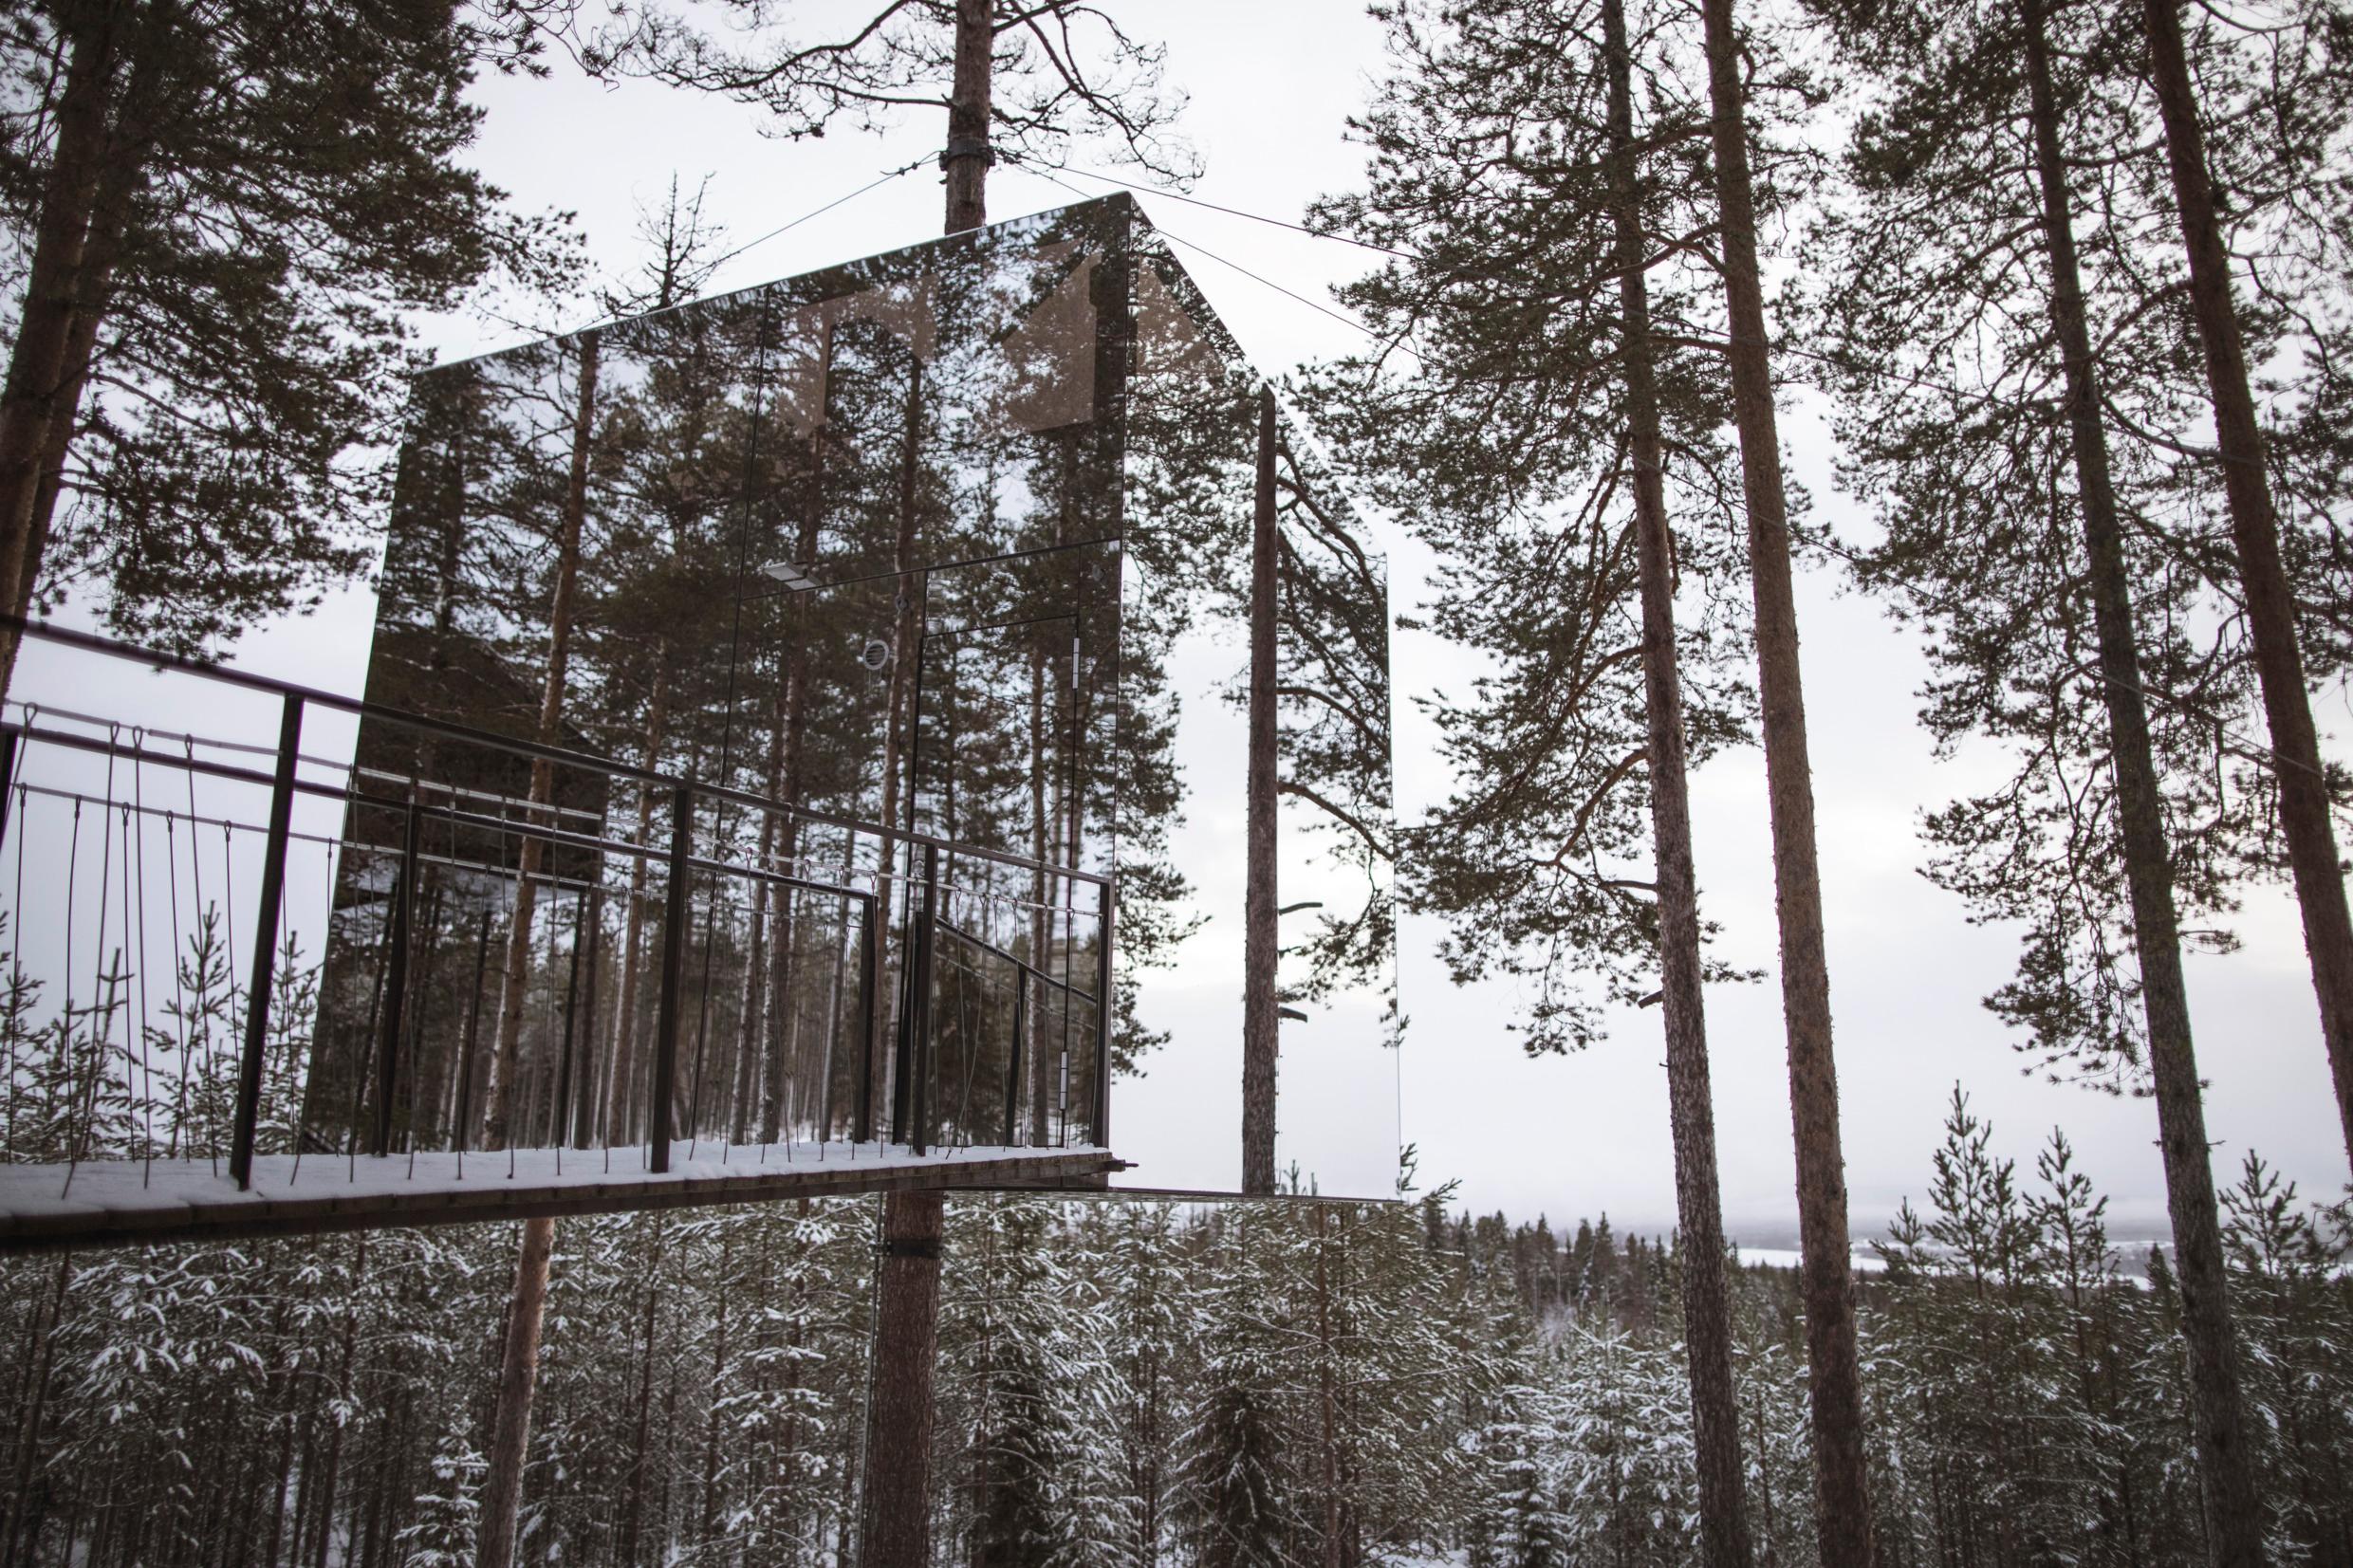 A treehouse made of mirror glass, set in a snowy forest in Swedish Lapland.